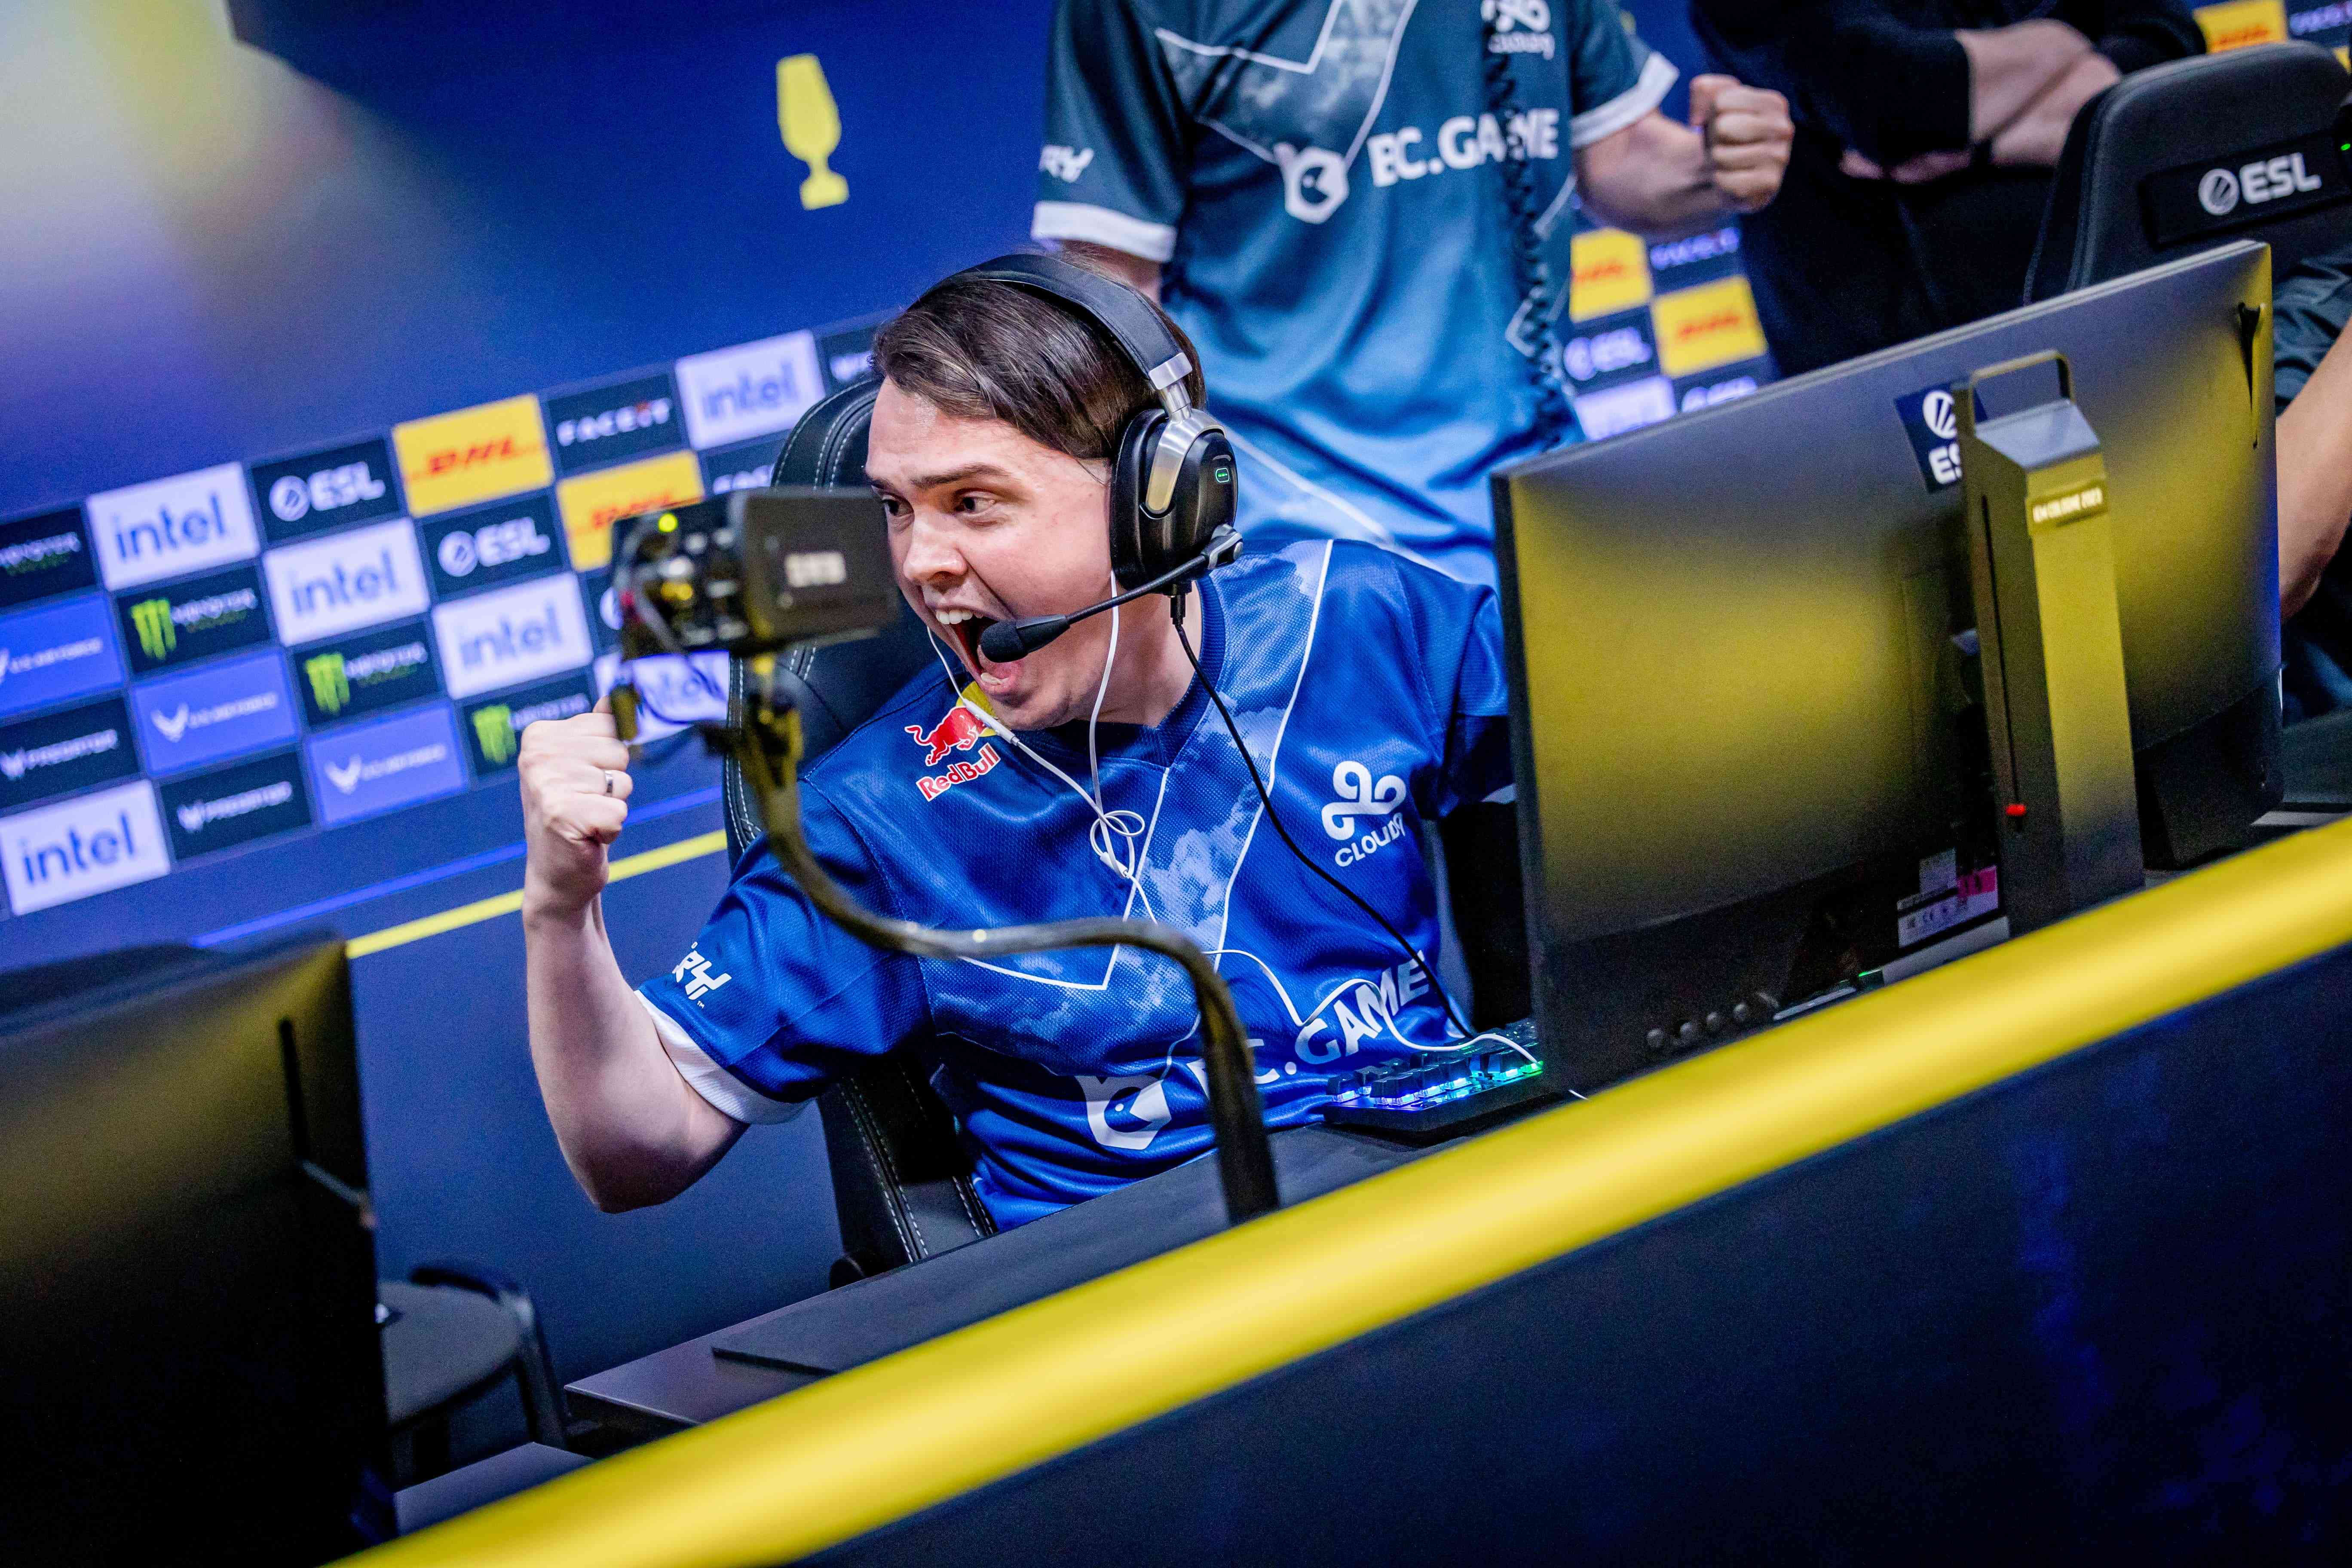 Once a contender for the title of best rifler in the world, electroNic’s individual performance took a downturn after he became NAVI’s captain (Image Credits: ESL | Stephanie Lindgren)